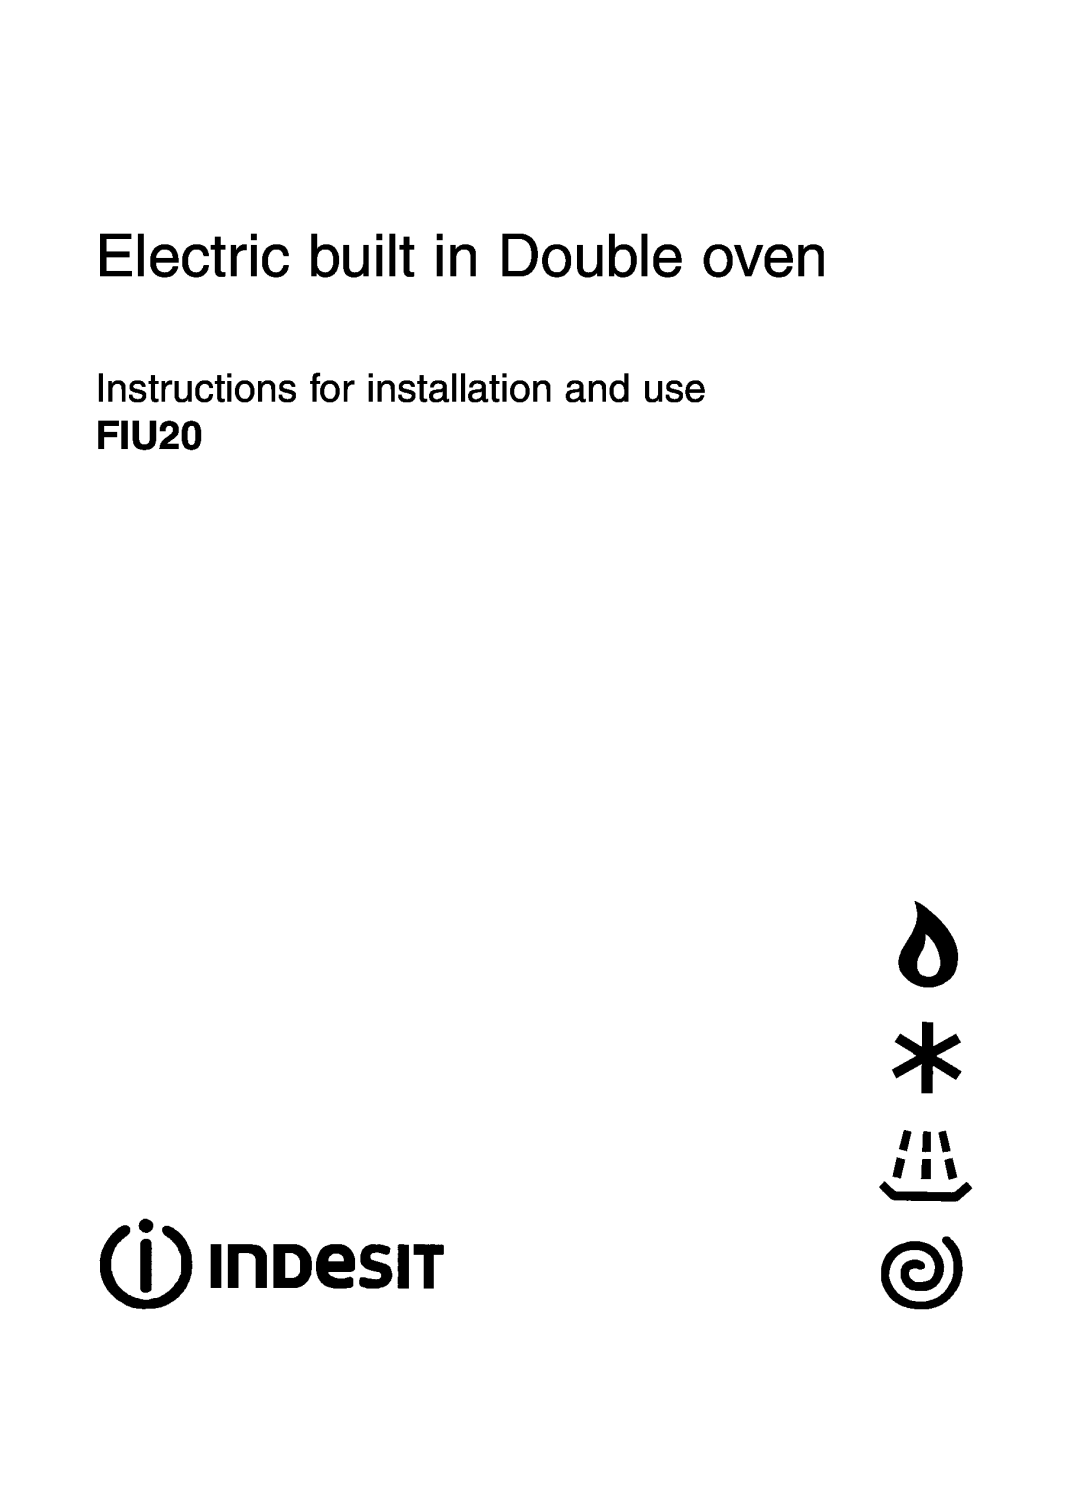 Indesit FIU20 manual Electric built in Double oven, Instructions for installation and use 